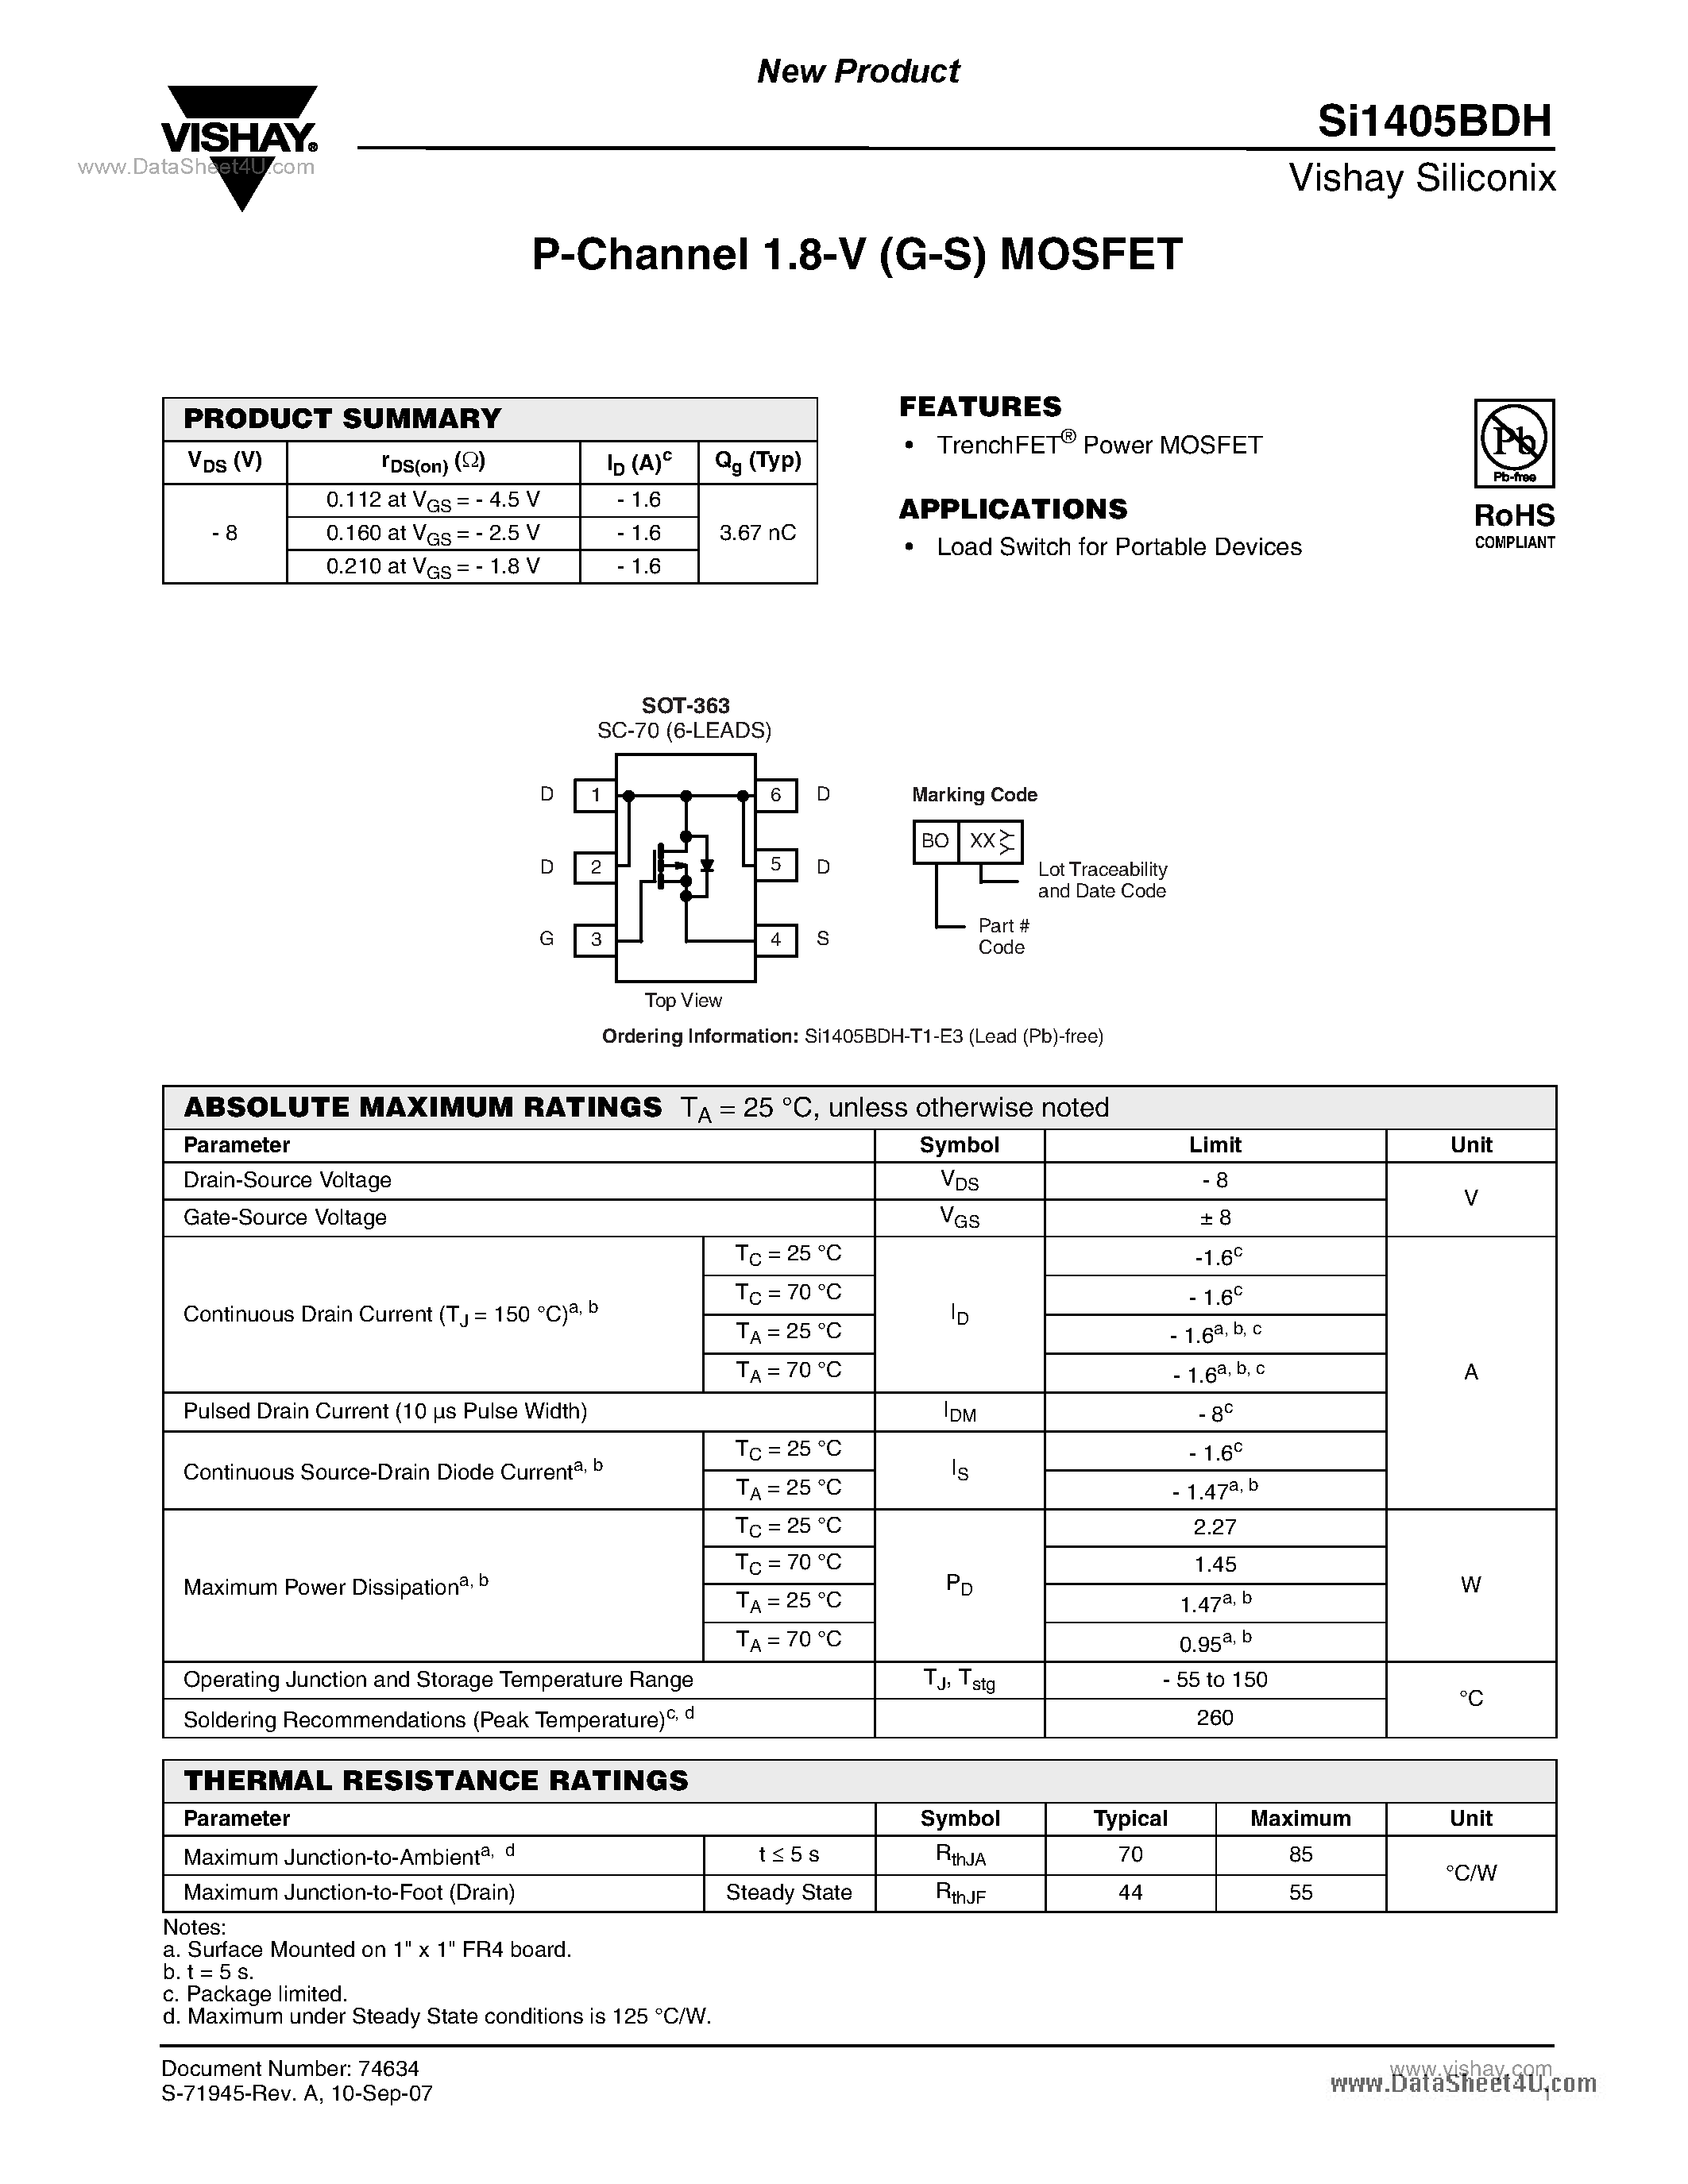 Даташит SI1405BDH - P-Channel 1.8-V (G-S) MOSFET страница 1